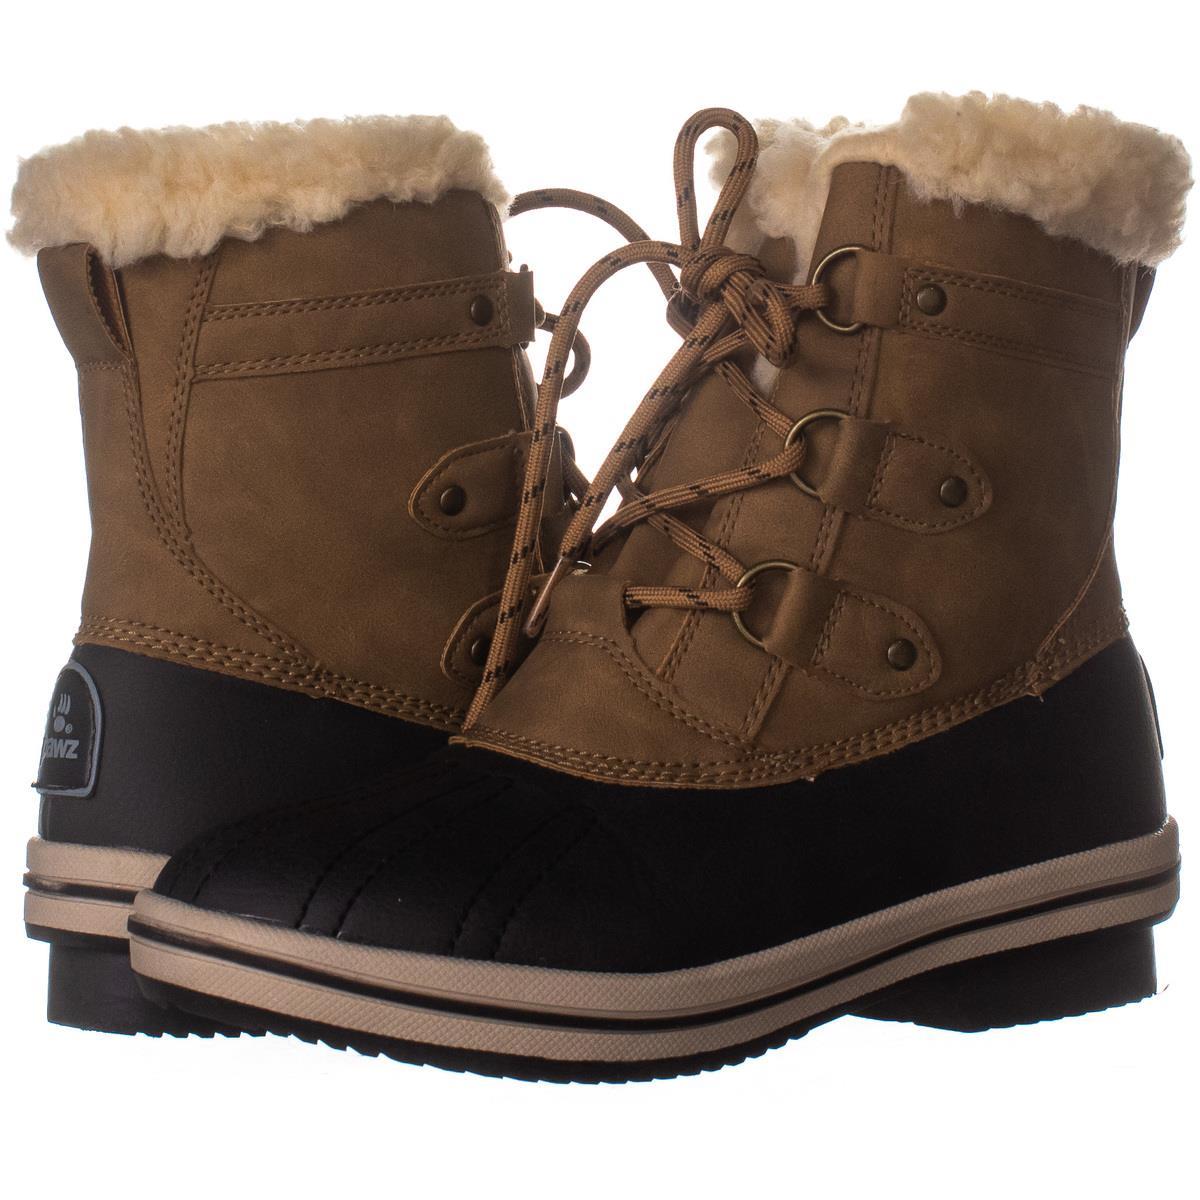 Bearpaw Womens Gina Closed Toe Ankle Cold Weather Boots, Hickory, Size ...